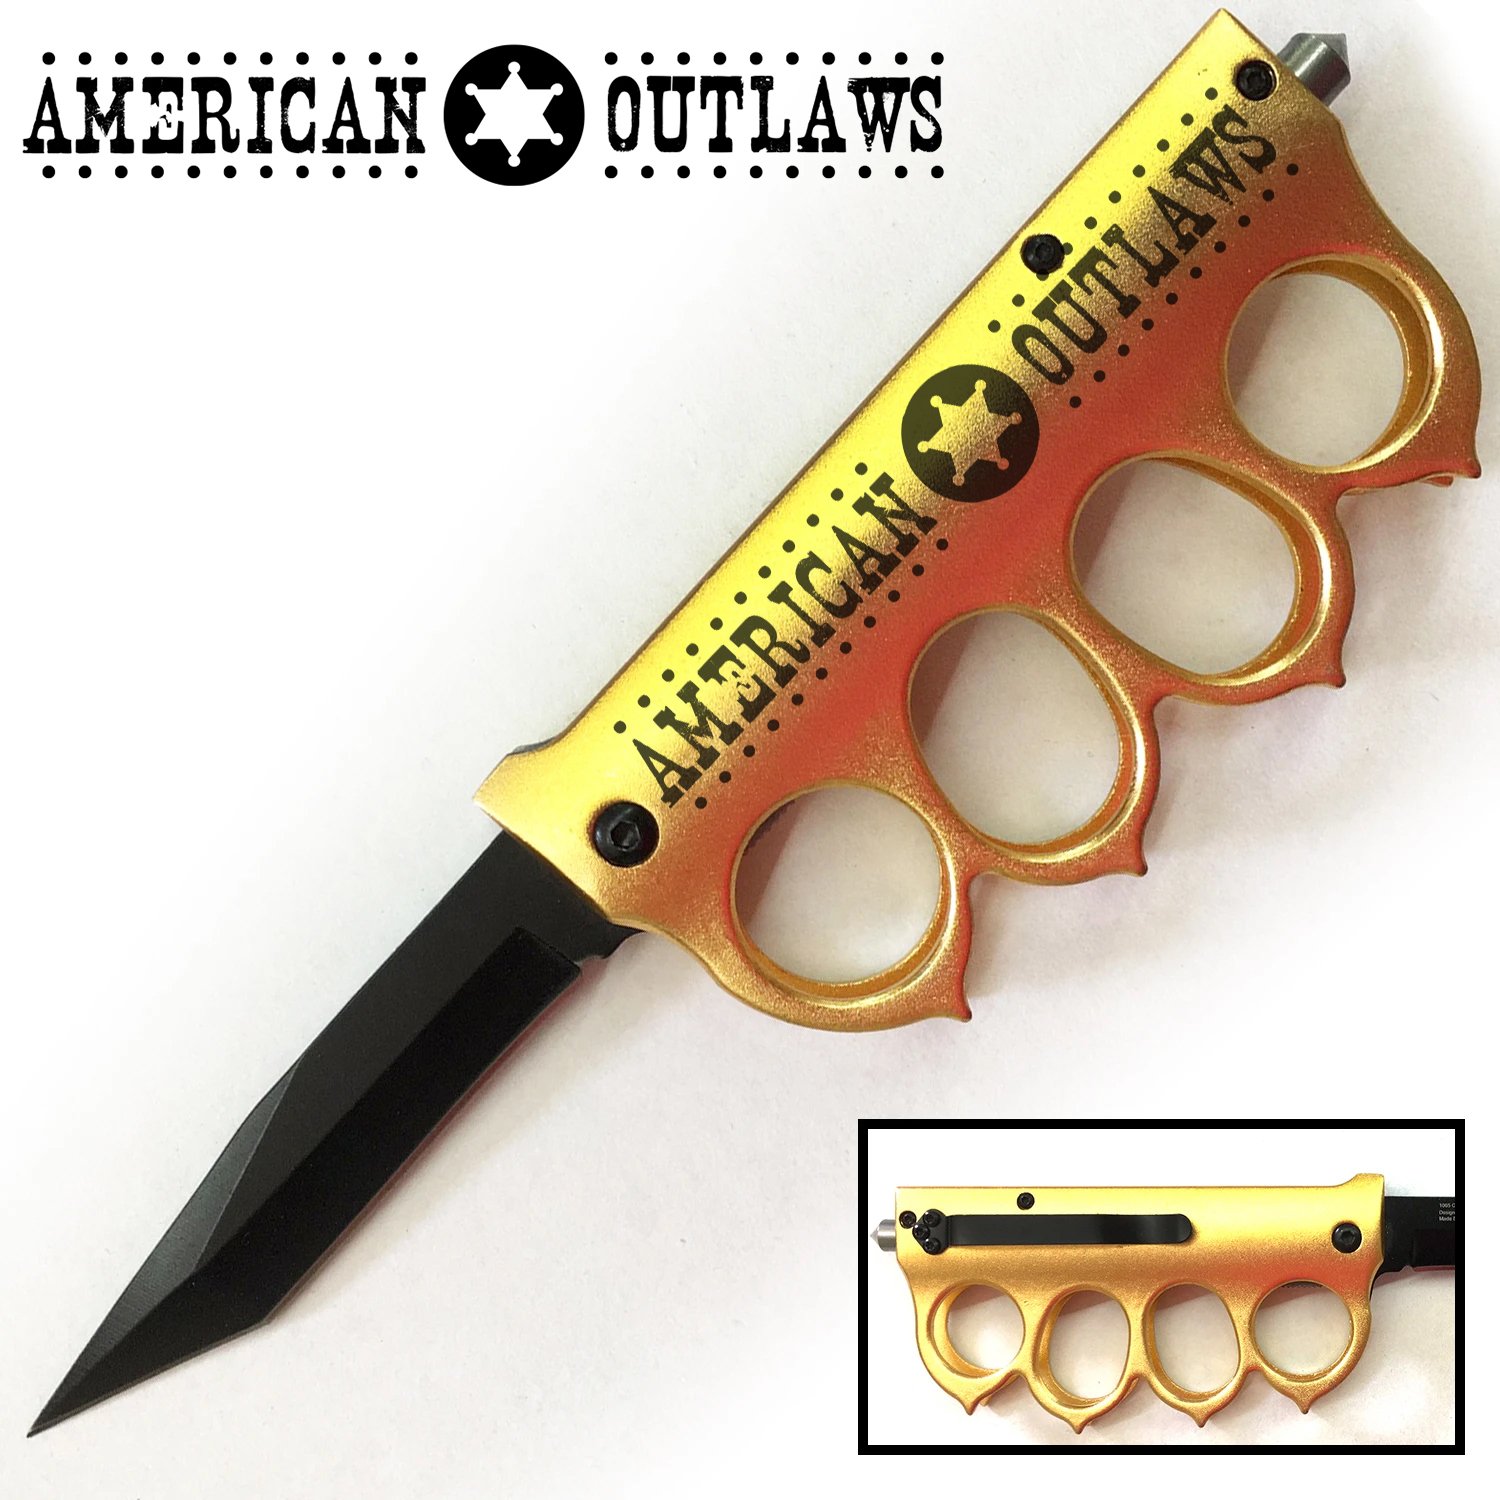 Tiger USA Gold Trench Knife Tanto Folding Knife American Outlaws